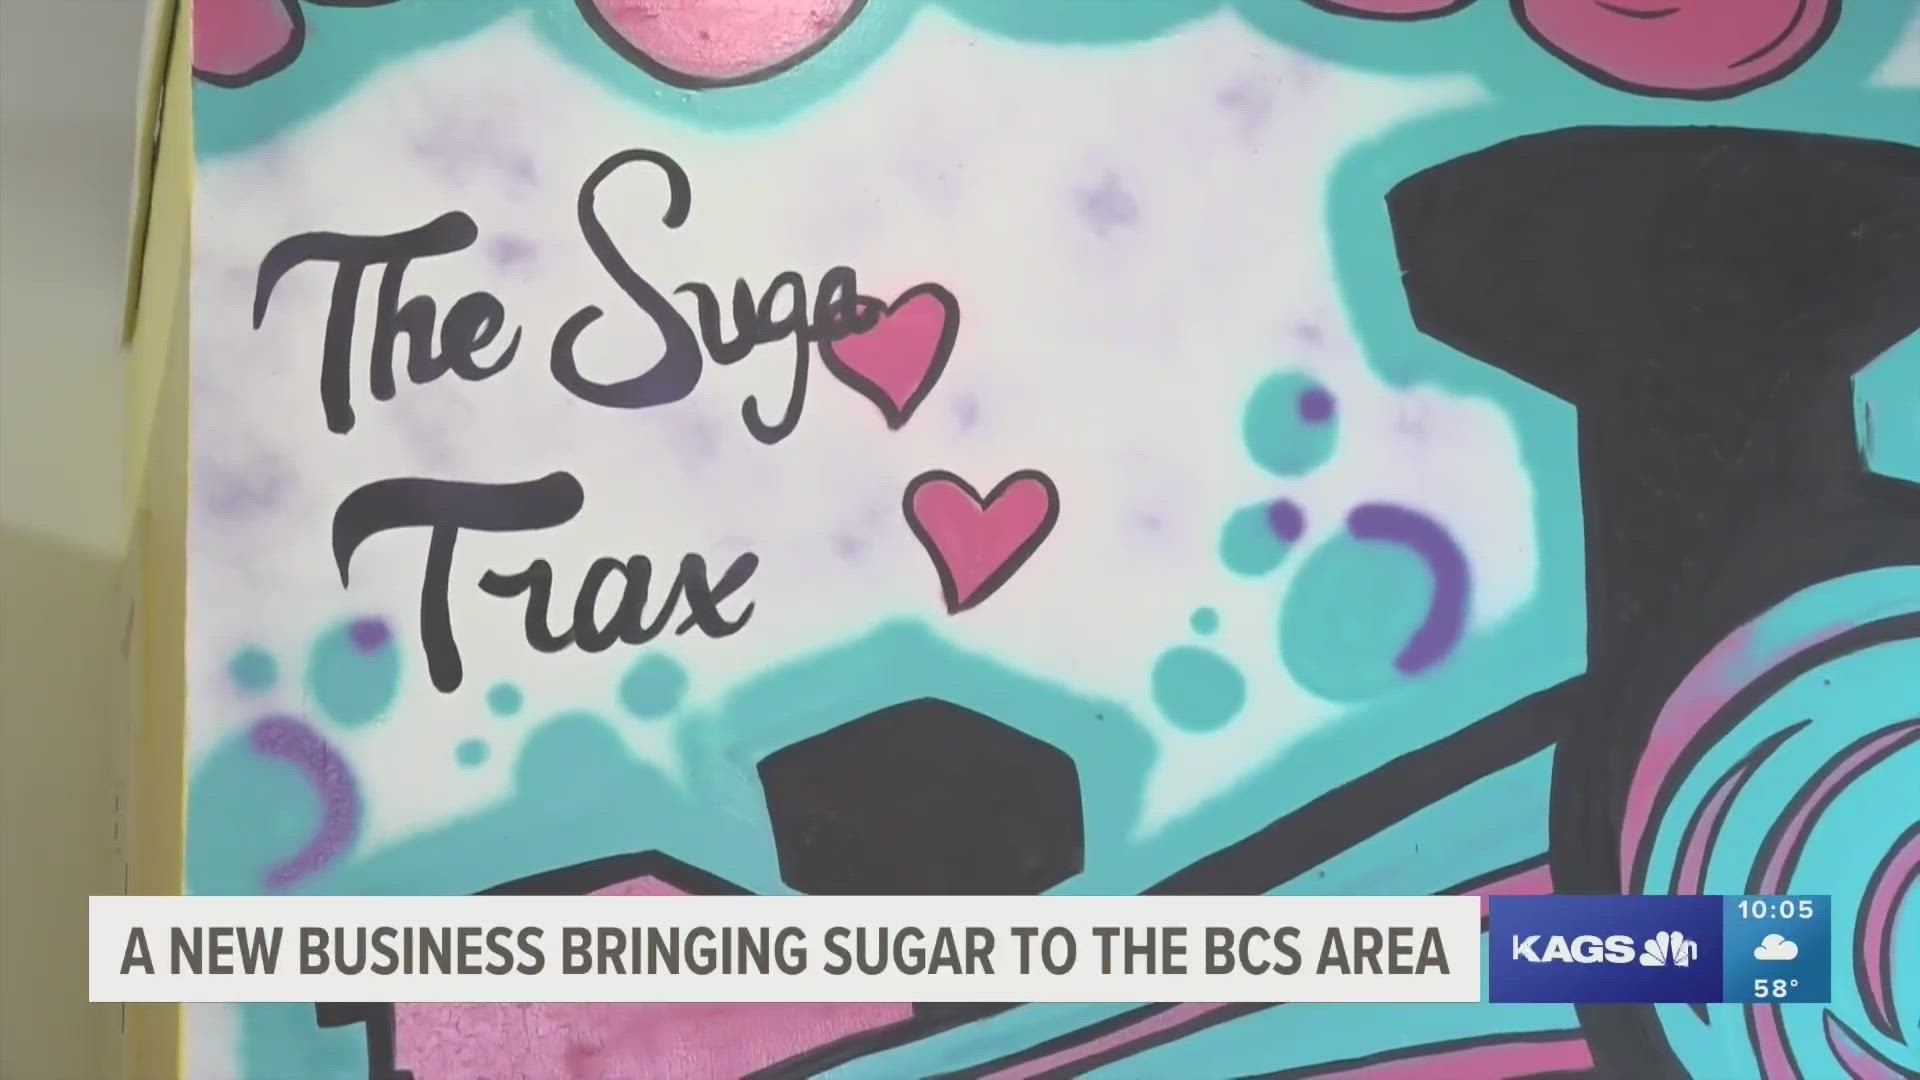 The Suga Trax, located in the heart of Downtown Bryan by a railroad crossing, started as a passion project of three friends, and has grown into a local delicacy.